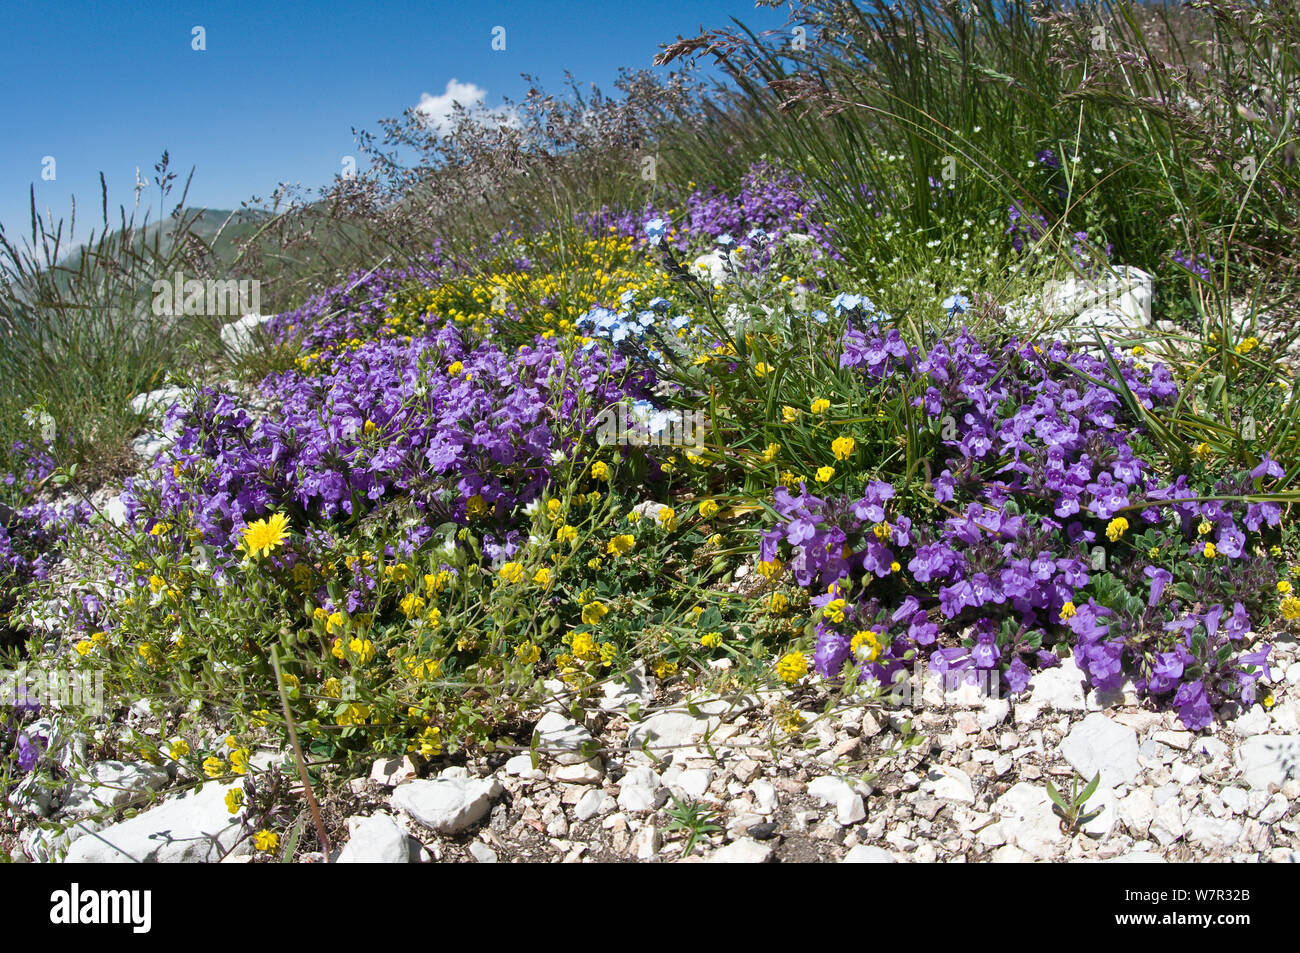 Basil Thyme (Acinos arvensis) in flower, with Forget me nots (Myotis sp) and other alpin flowers, Mount Vettore, Sibillini, Umbria, Italy, June Stock Photo